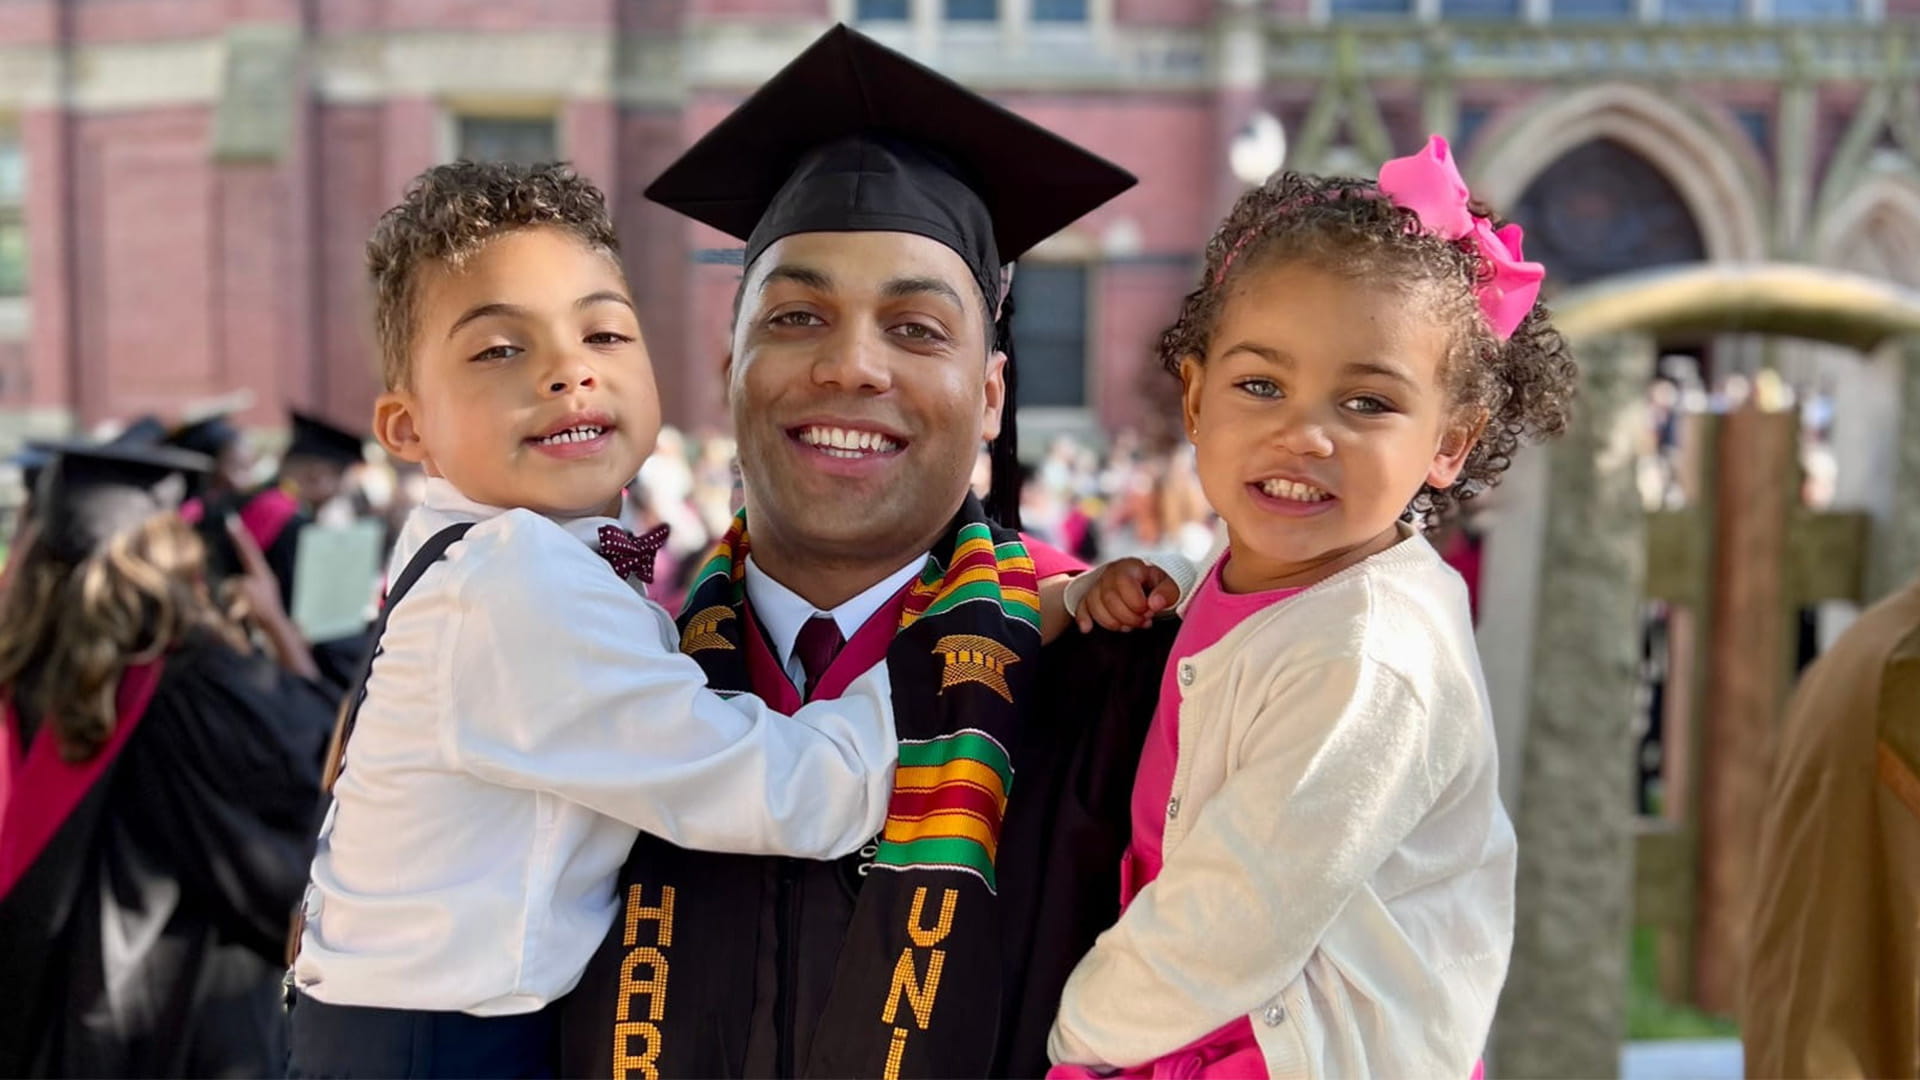 Chris Ricks graduated from Harvard Business School in May 2022, with support from the Raytheon Missiles & Defense SPY-6 scholarship program for U.S. Navy student veterans. (Photo: Chris Ricks)